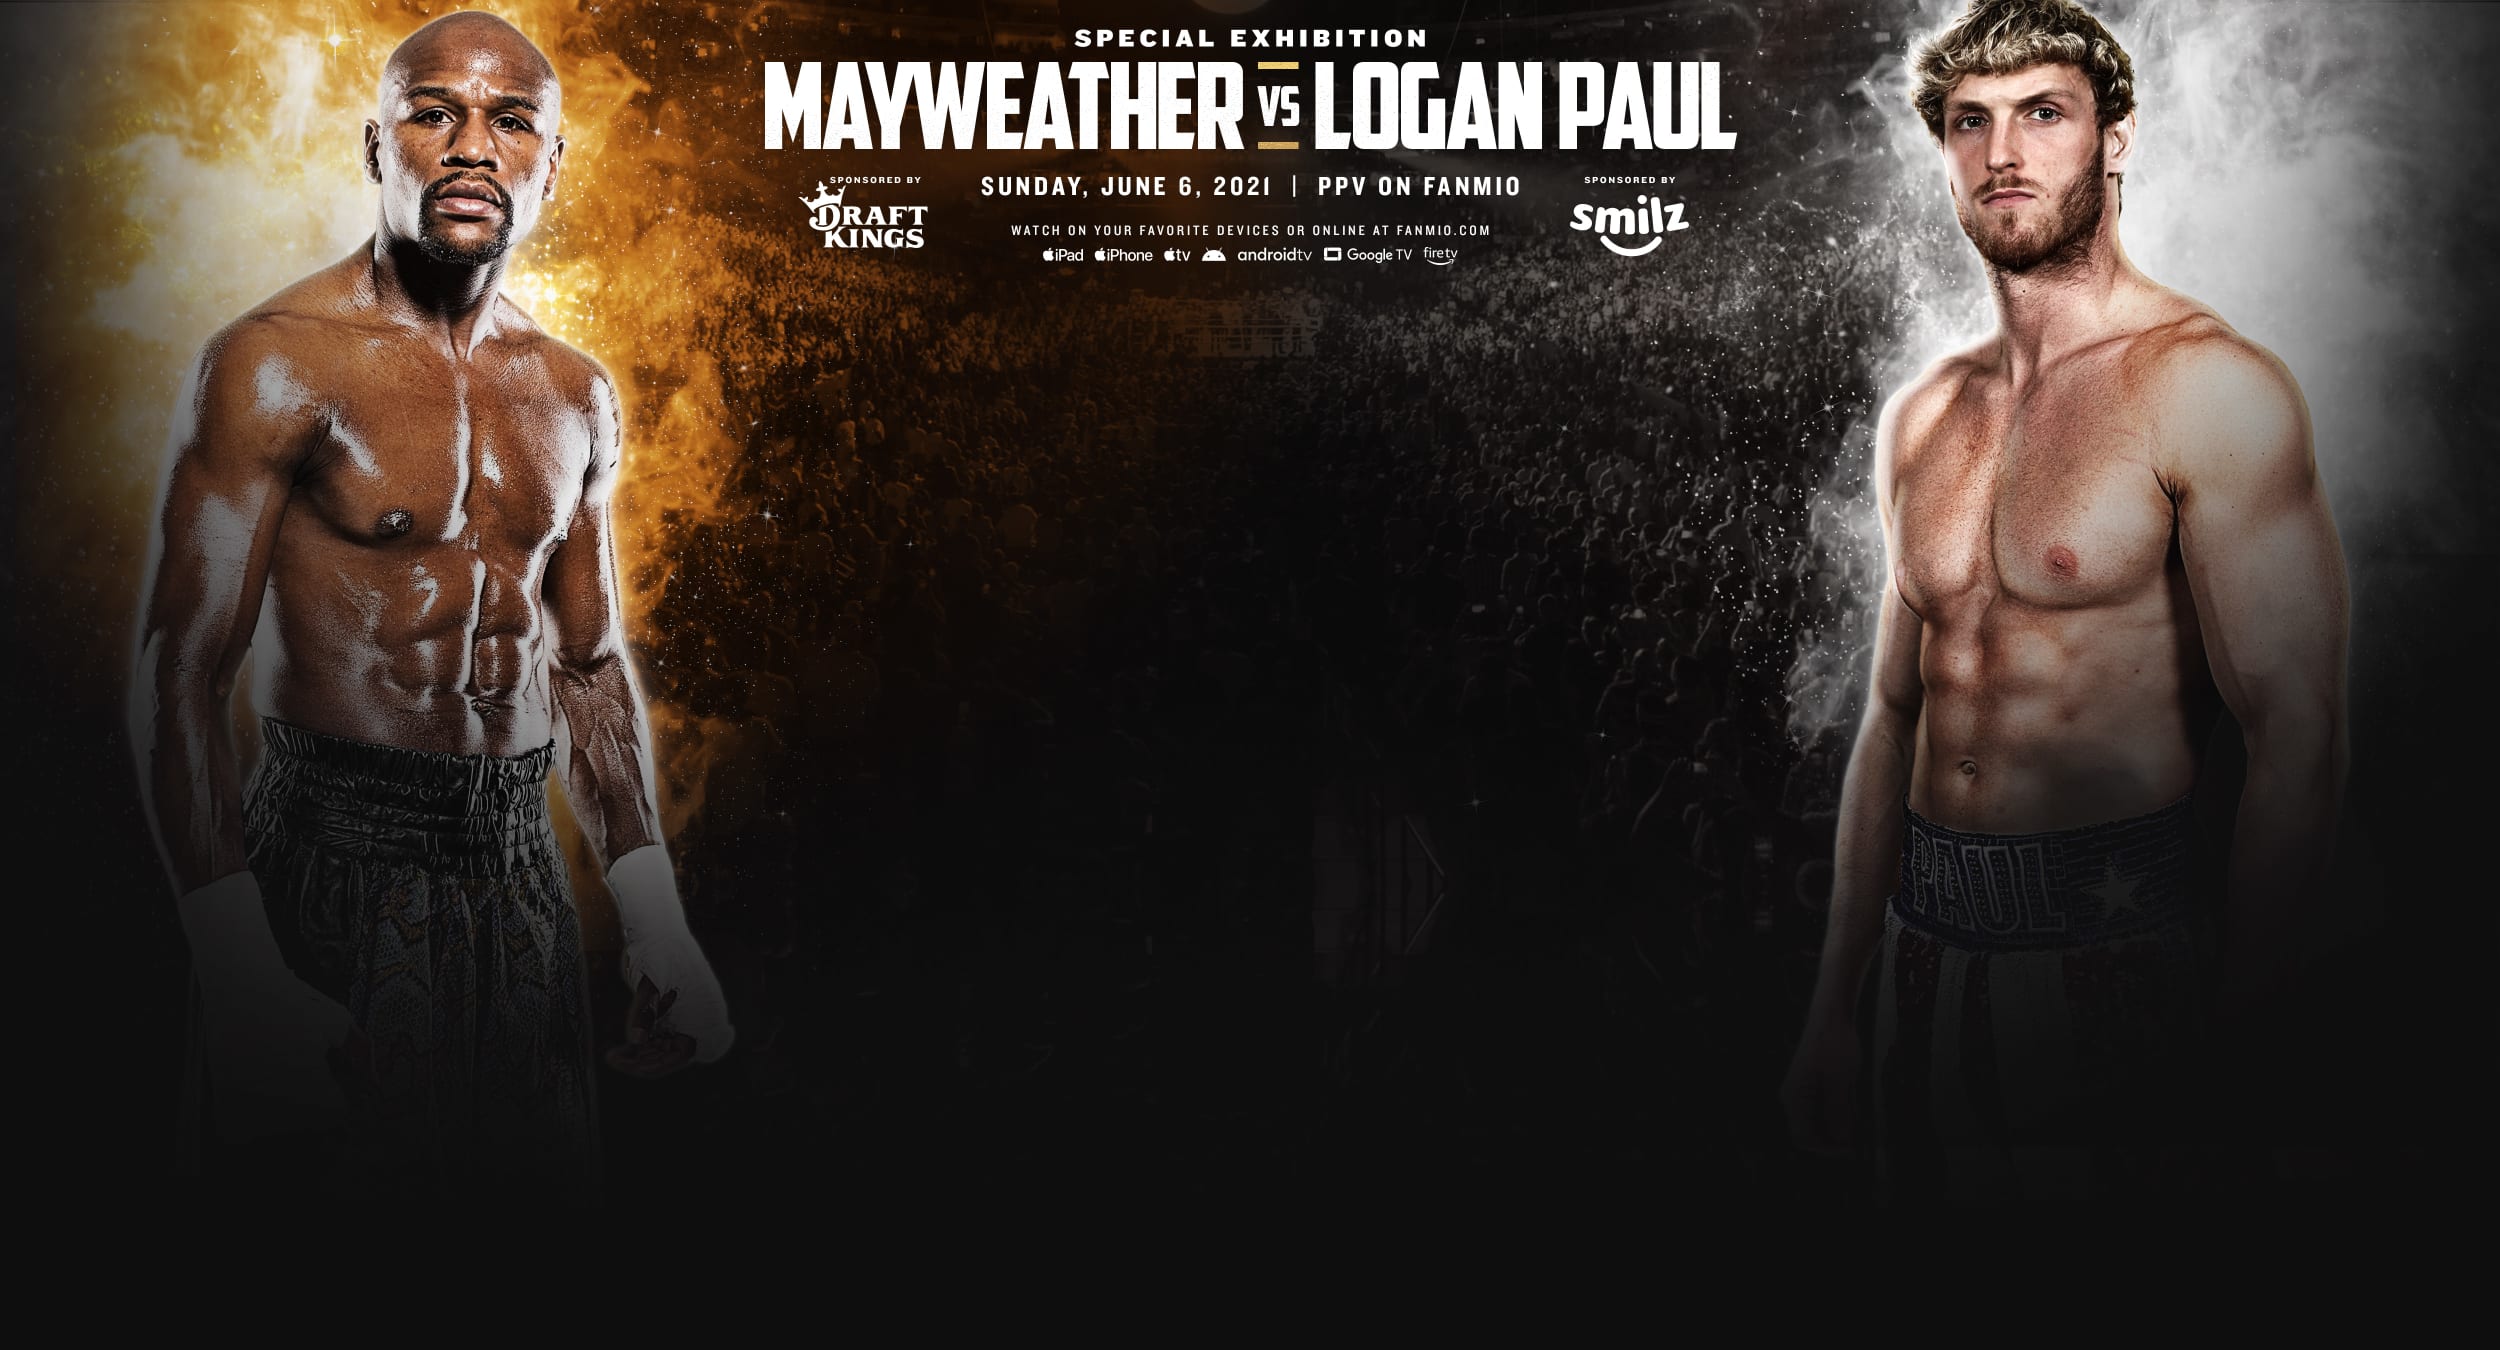 Floyd Mayweather vs Logan Paul Special Exhibition Fight